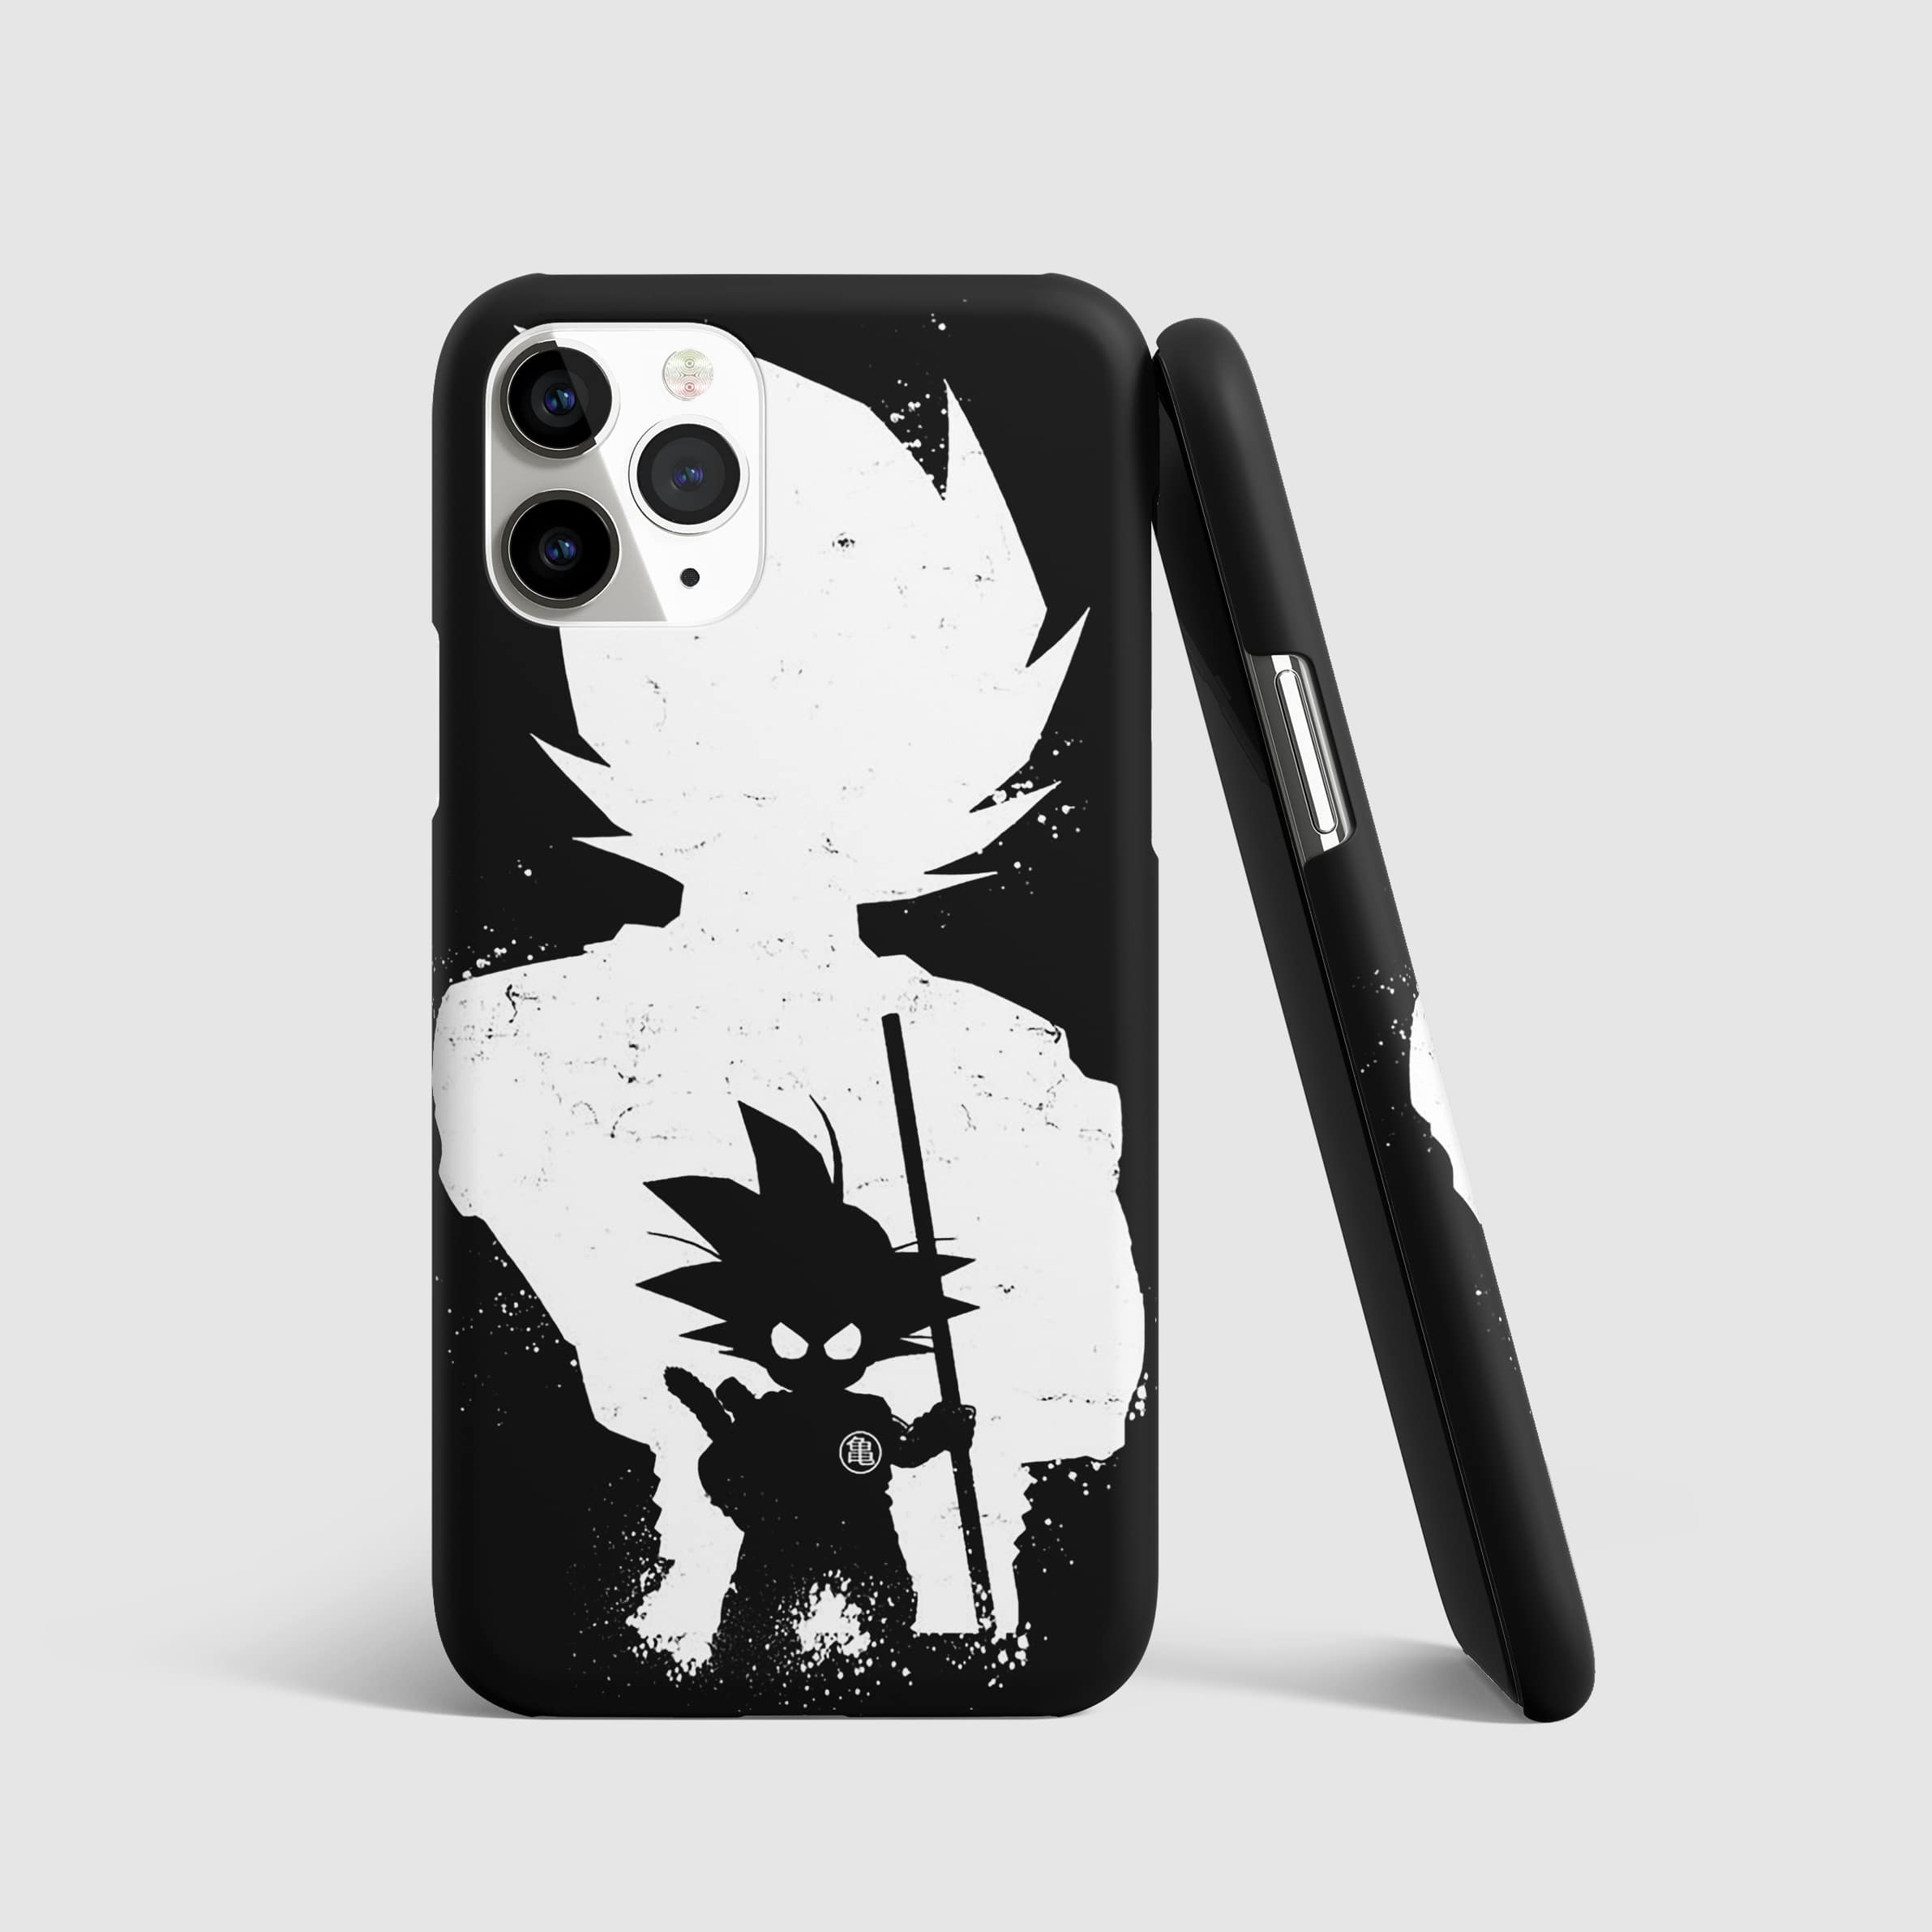 Gohan Black and White Phone Cover